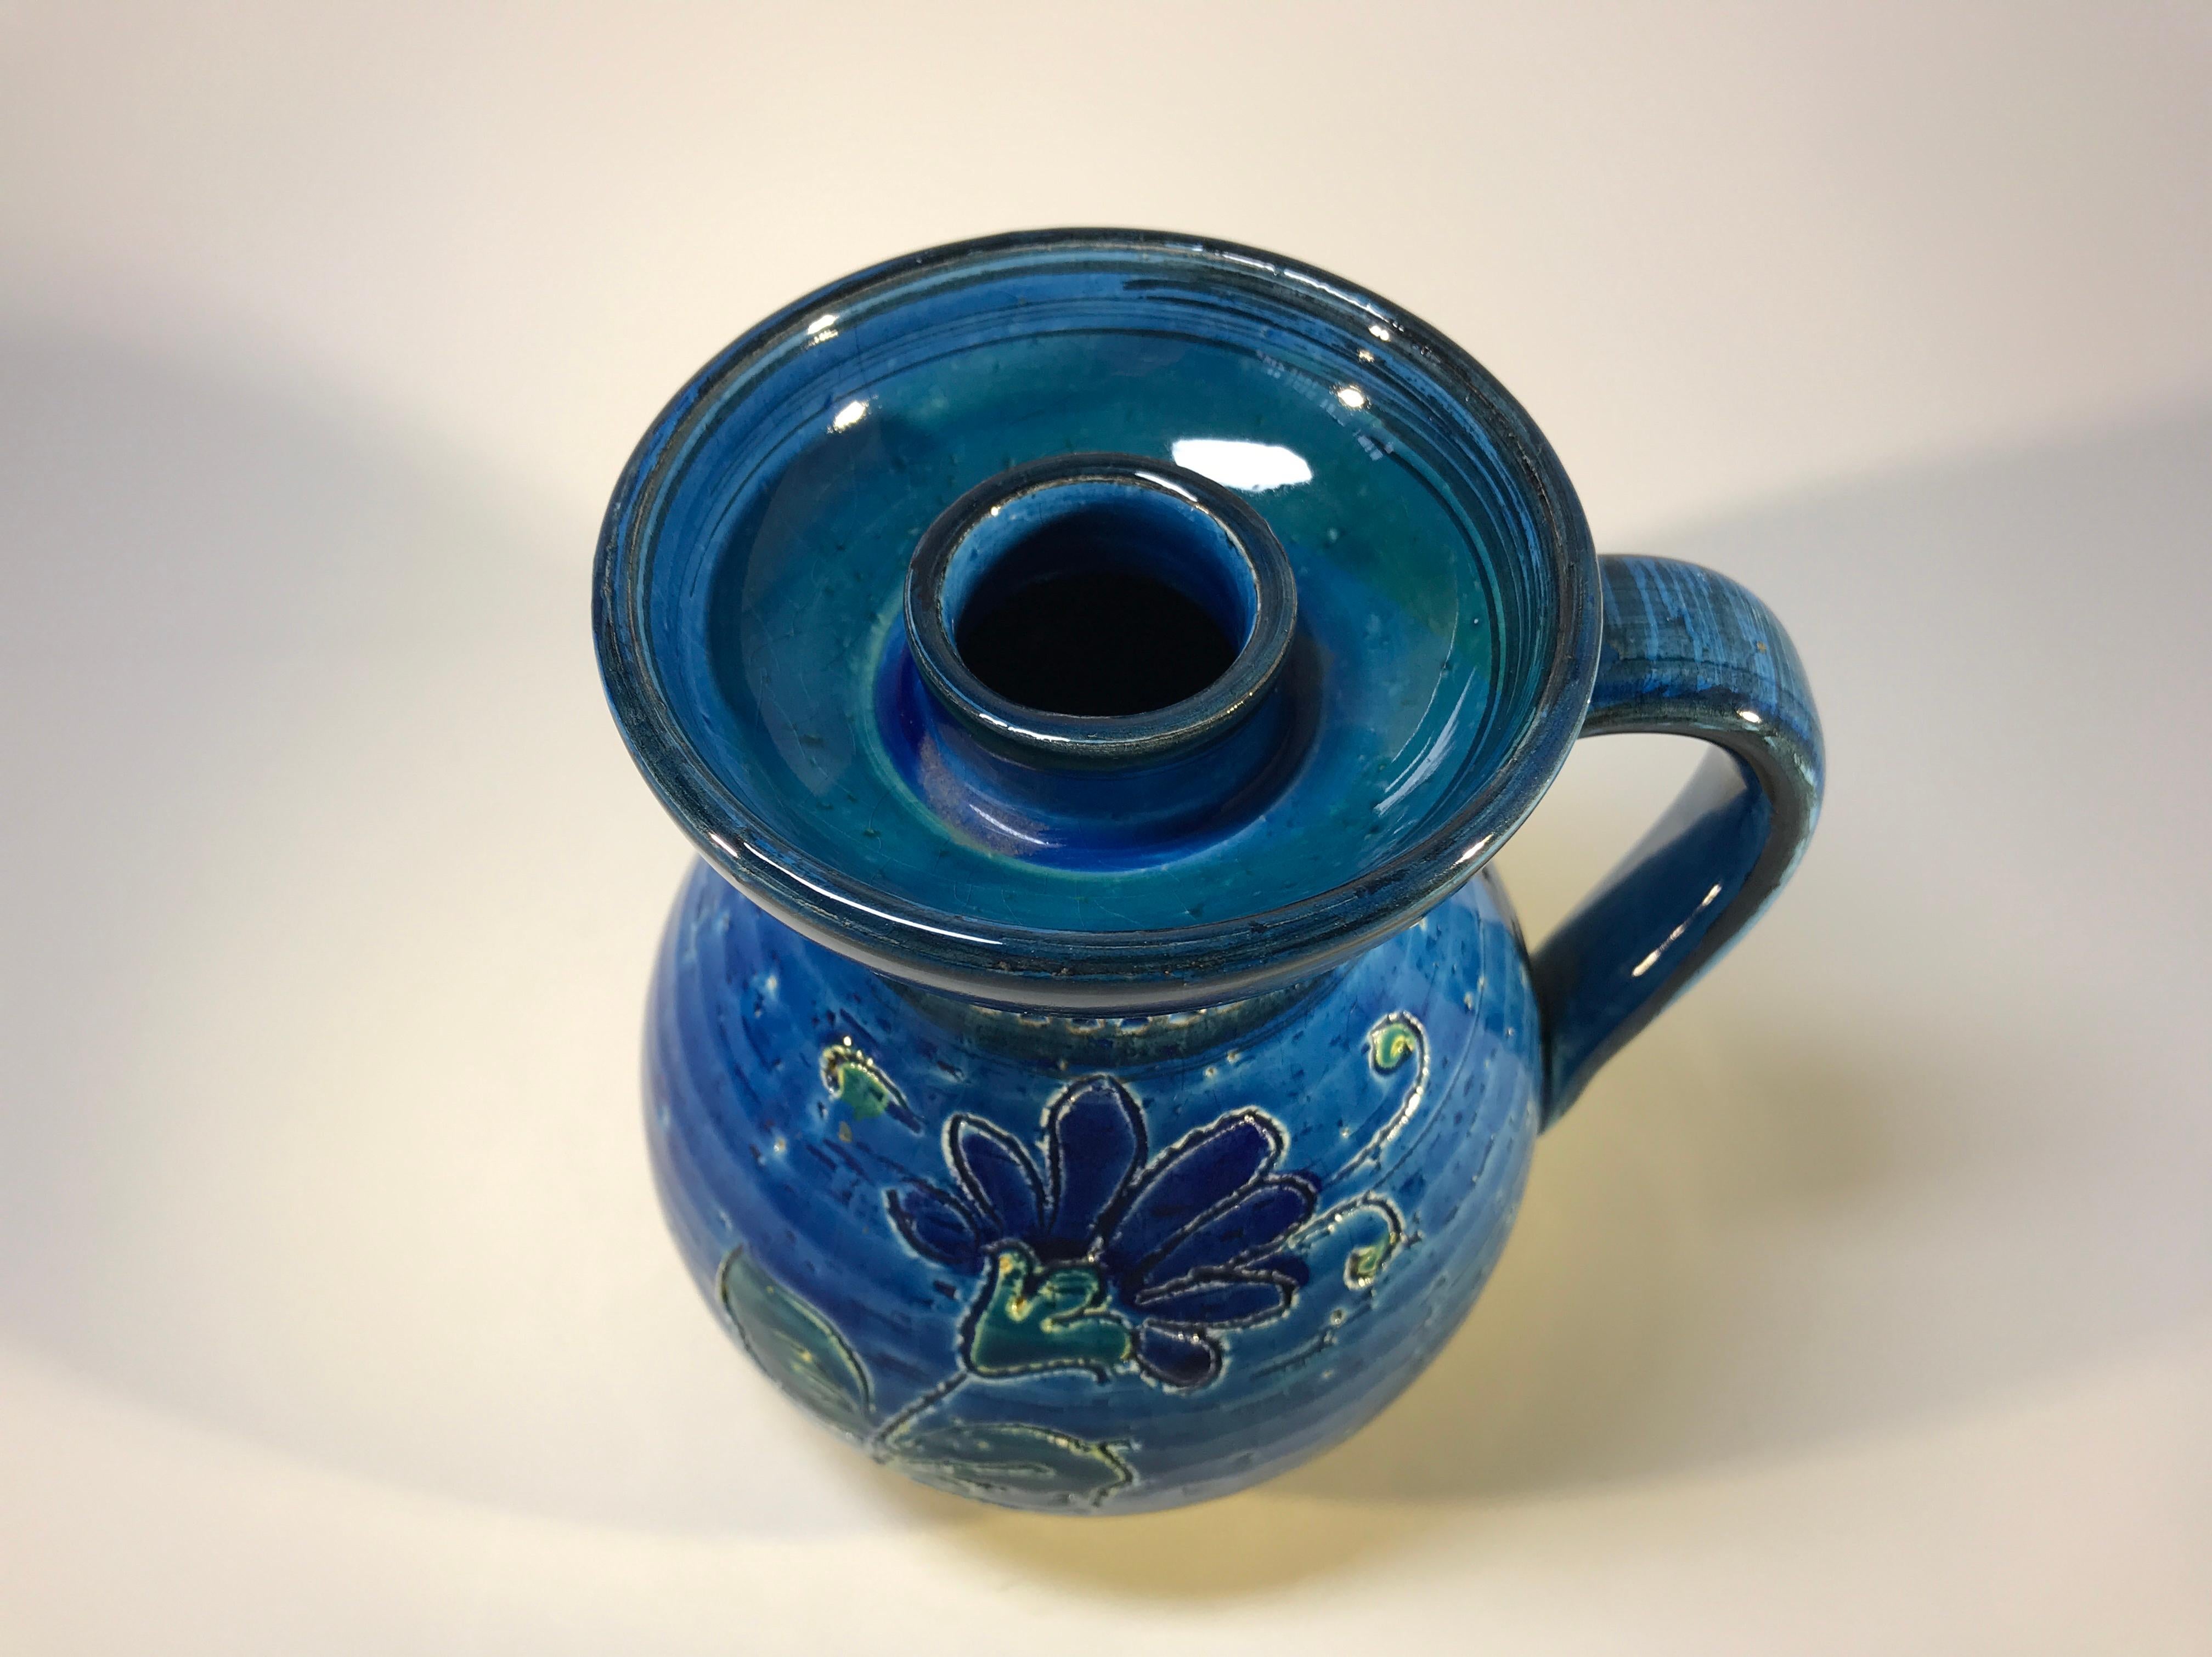 Candleholder by Aldo Londi for Bitossi of Italy, Rimini blue ceramic jug shaped with hand incised floral decoration,
circa 1970s
Measures: Height 5.5 inch, width 5 inch
In excellent condition
Wear consistent with age and use.